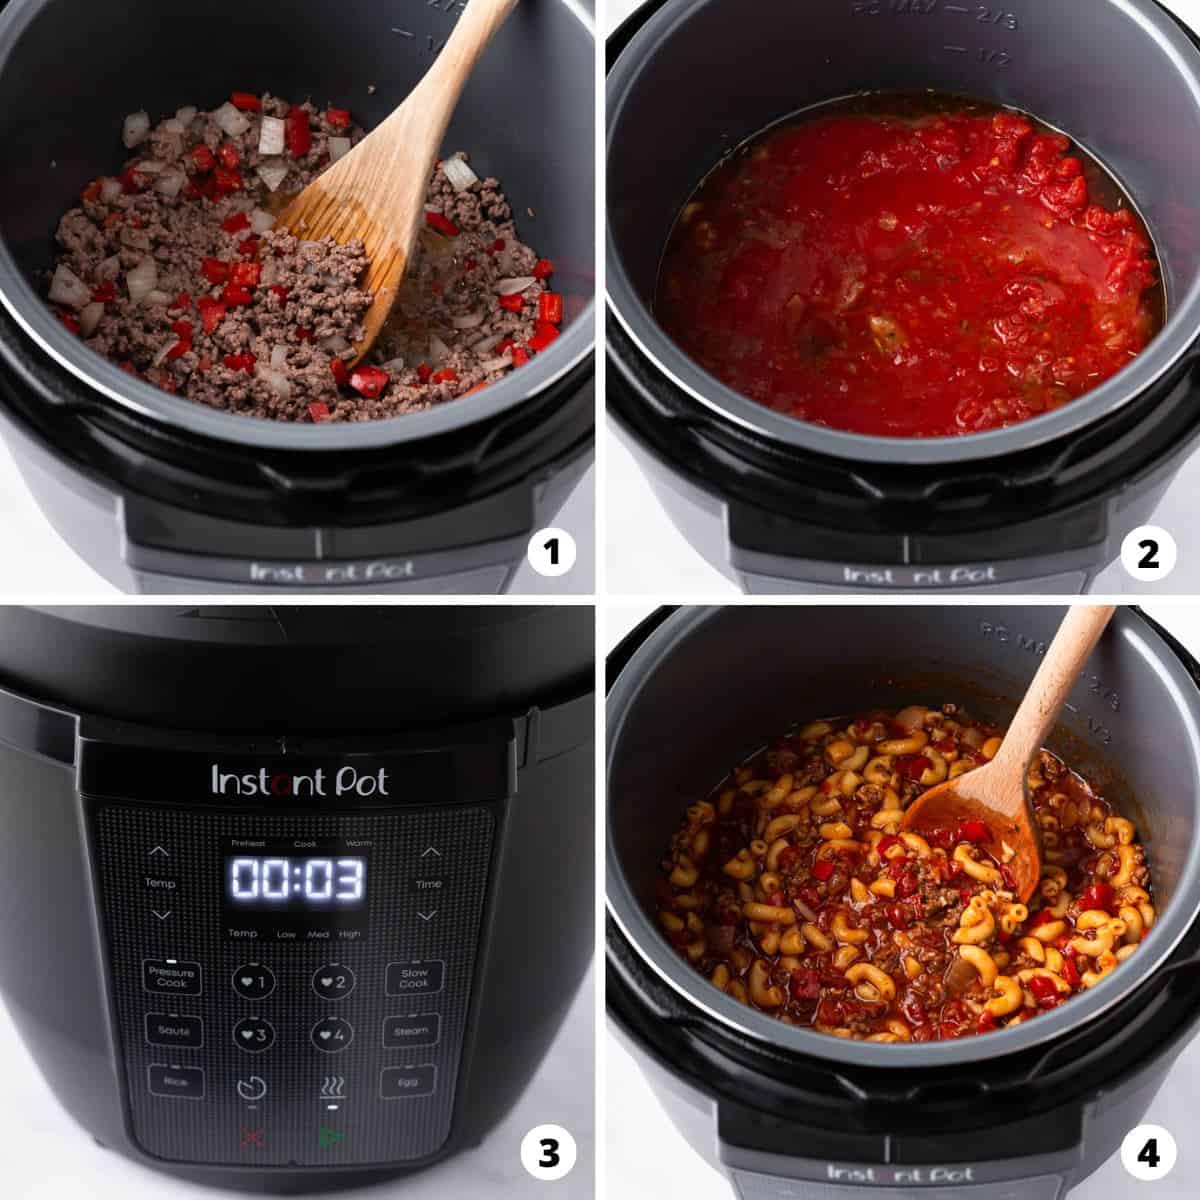 Showing how to make instant pot goulash in a 4 step collage.